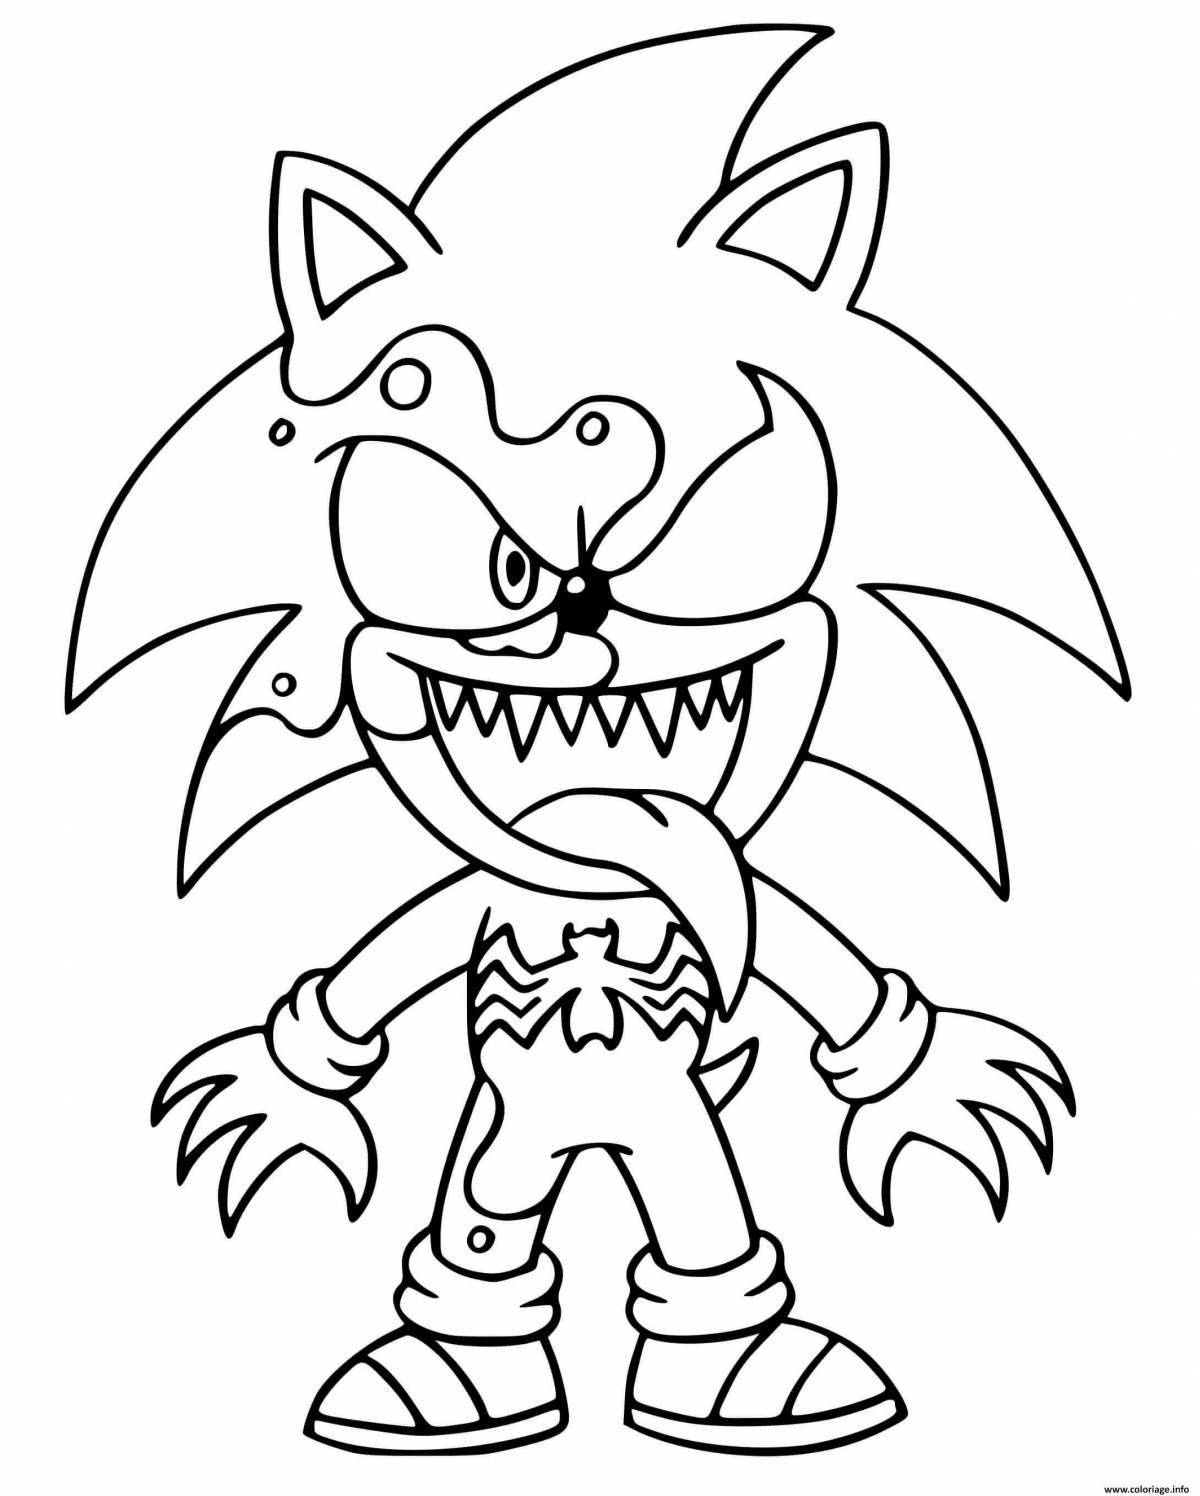 Sonic exe fun coloring book for kids